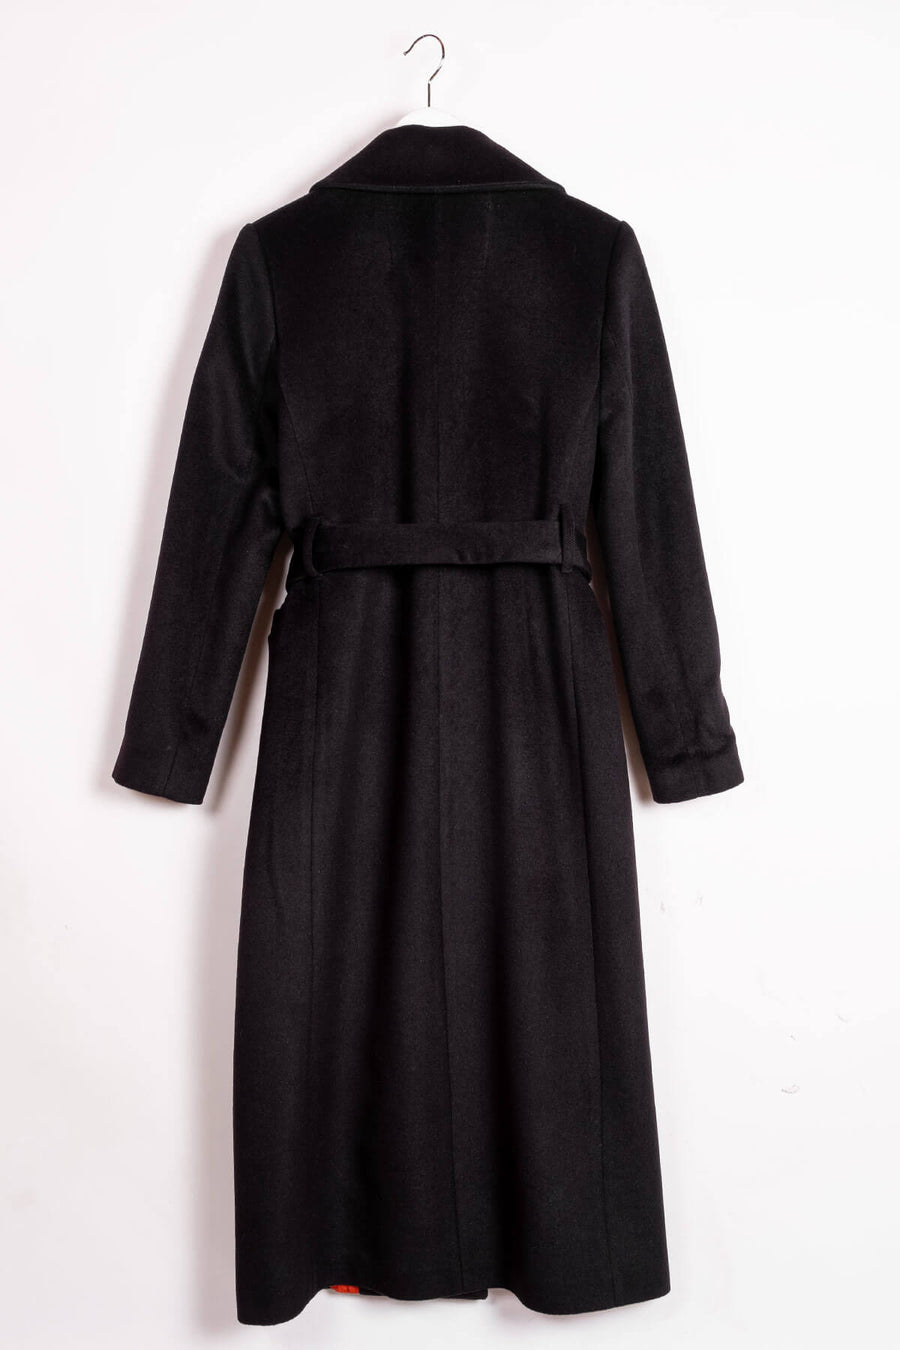 MAGIE Wool Double Breasted Belted Coat - Black